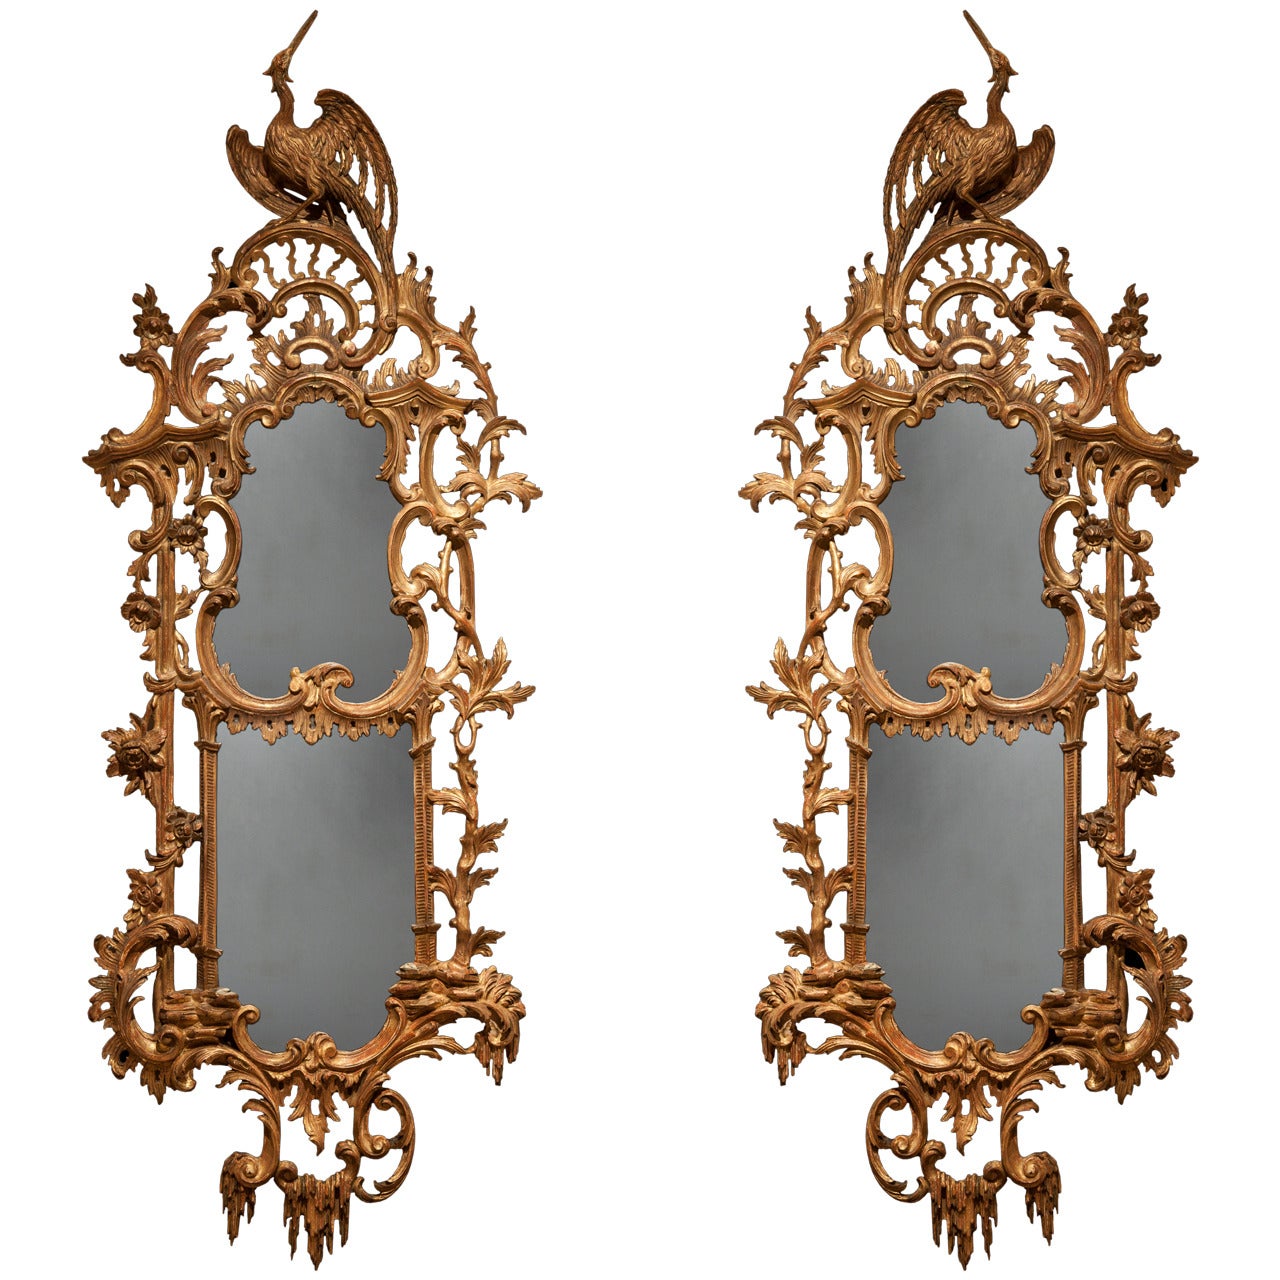 Pair of Giltwood Antique Mirrors